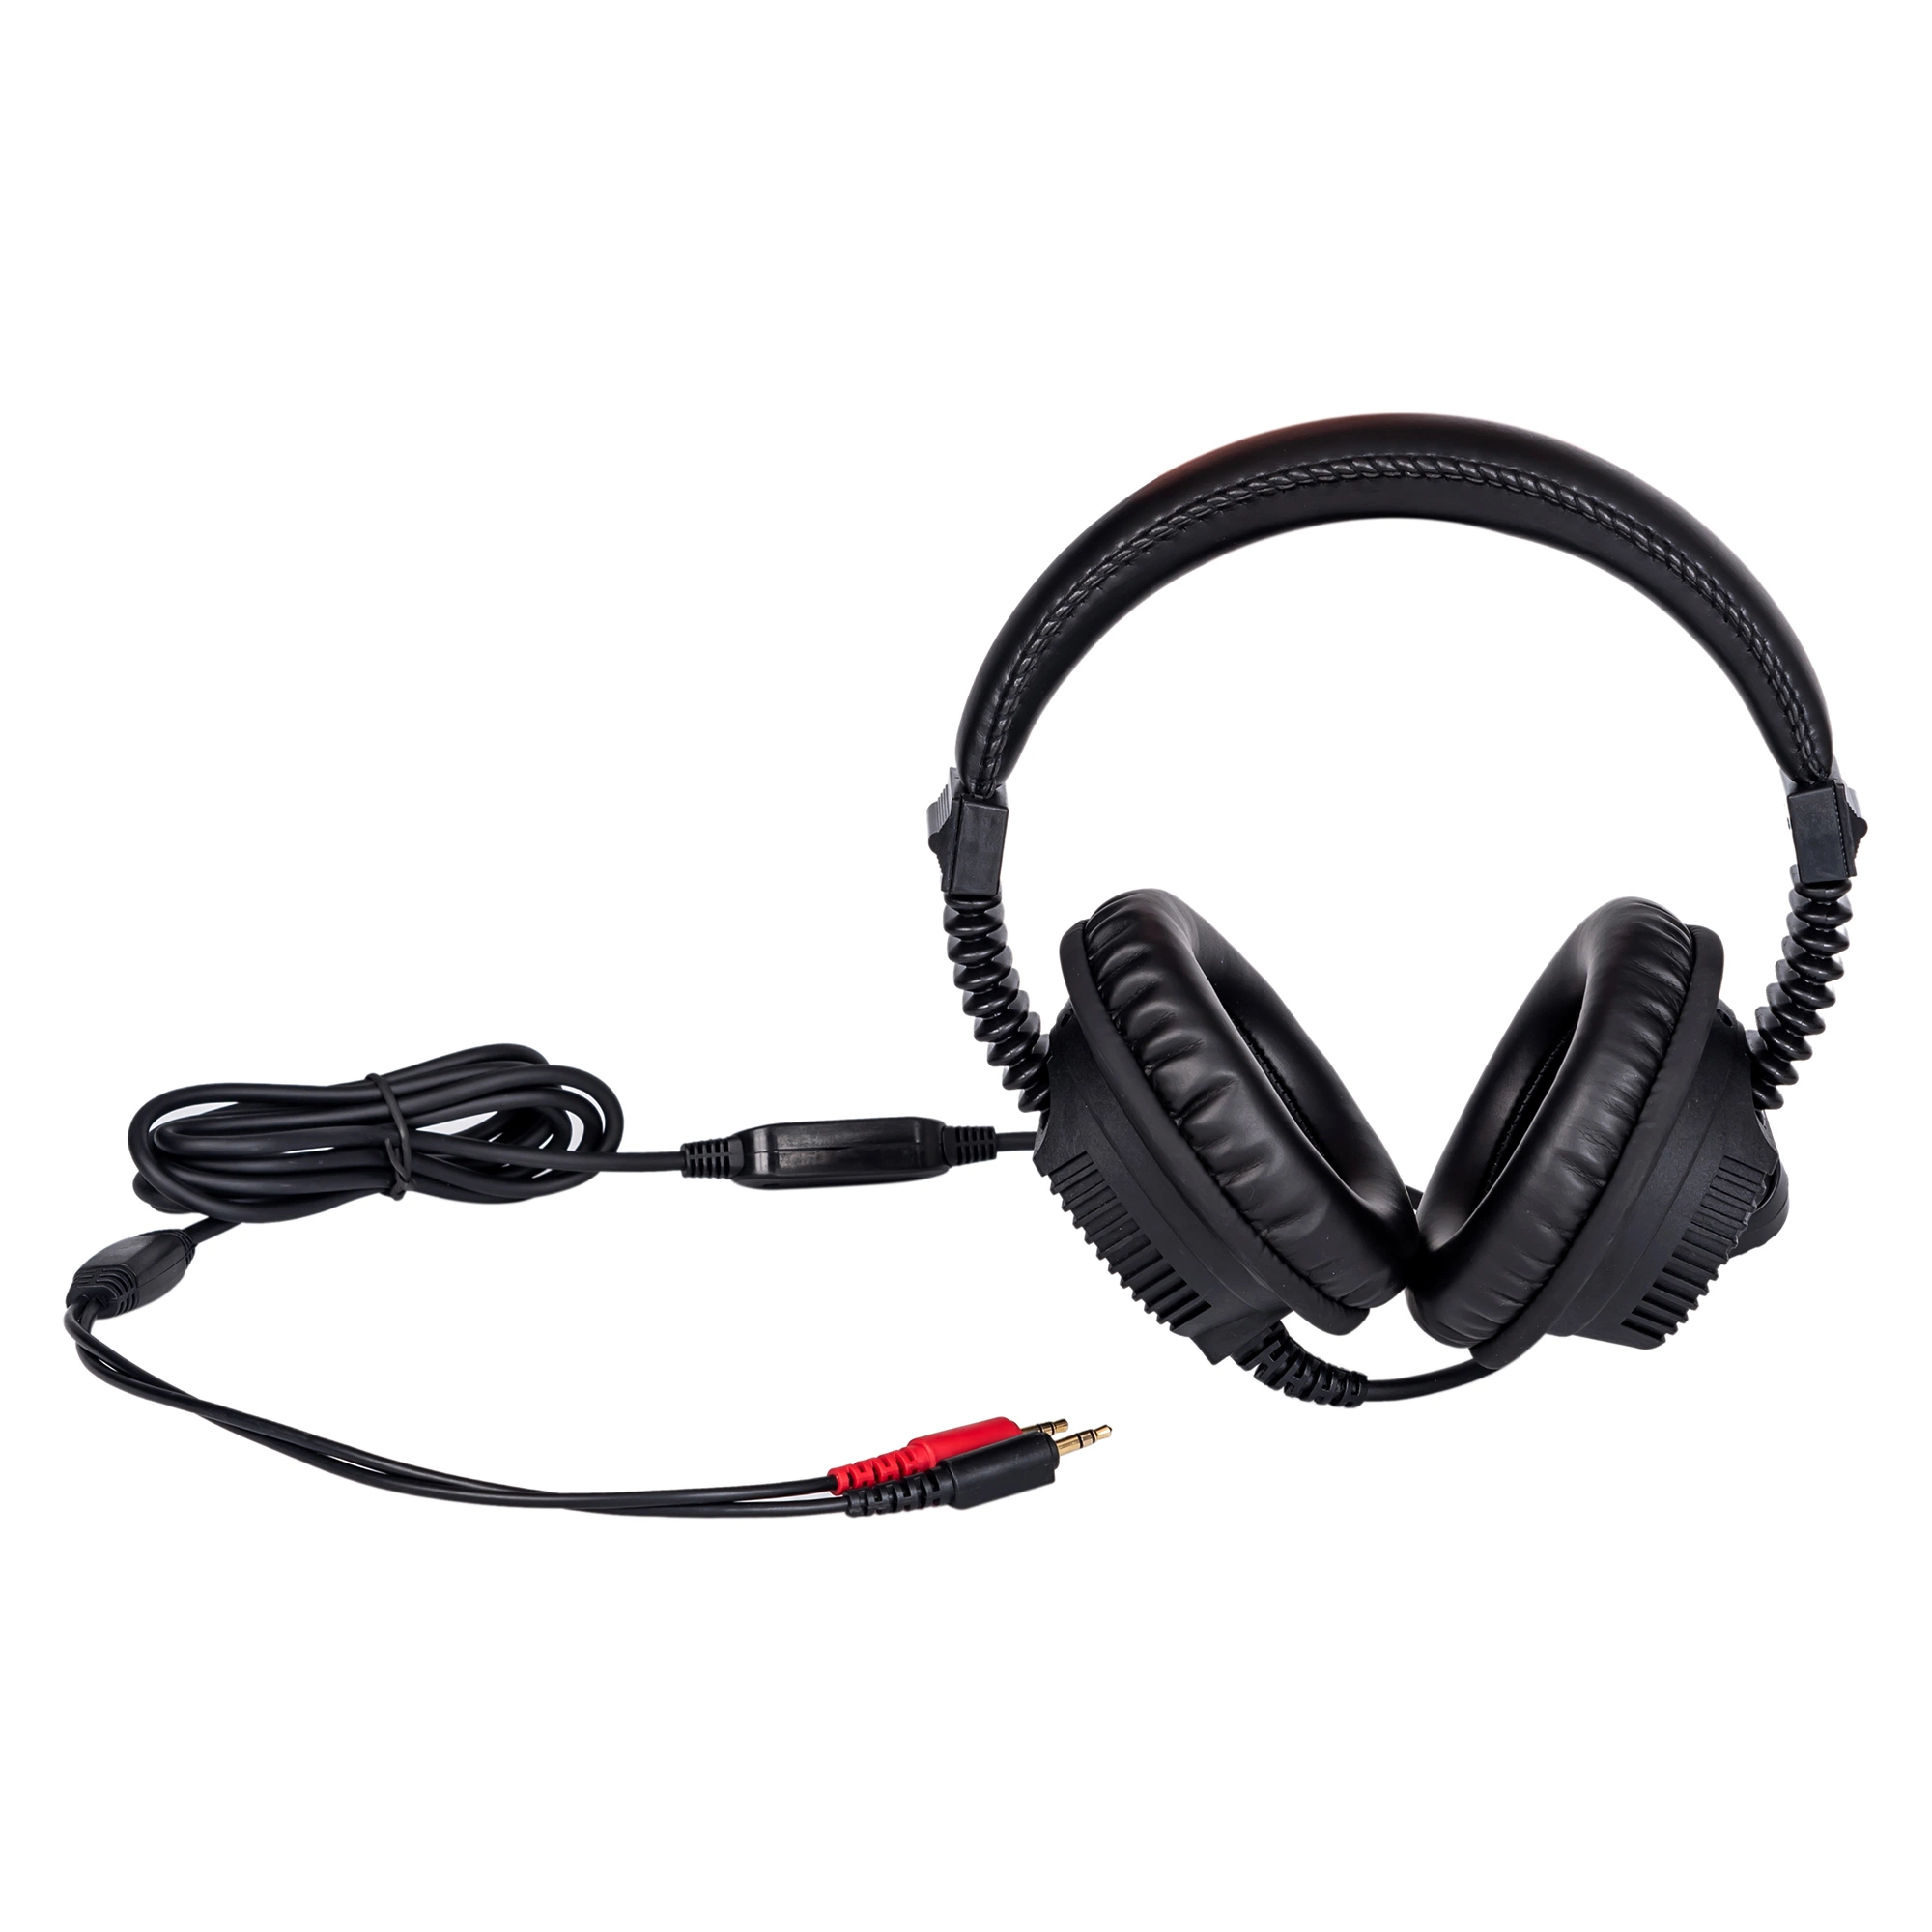 Headset 3.5mm Language Lab Over Ear Headphone CE RoHS OEM Available for Language Computer Lab Wired Cable USB Stereo Noise Canceling